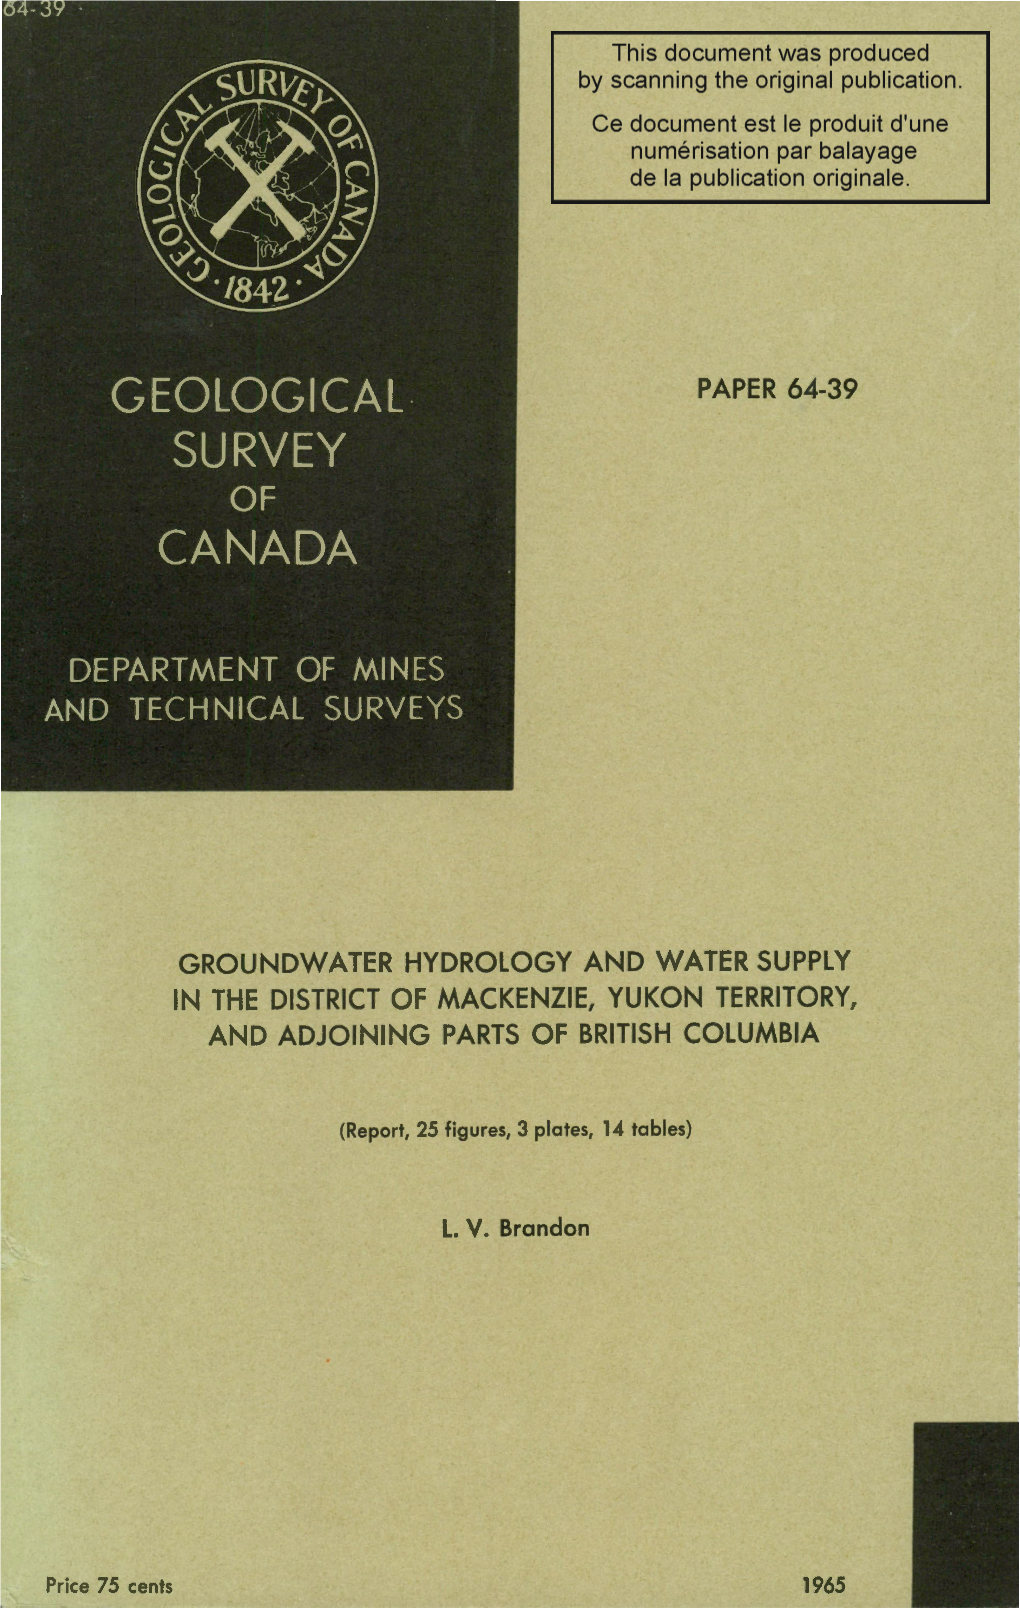 Paper 64-39 Groundwater Hydrology and Water